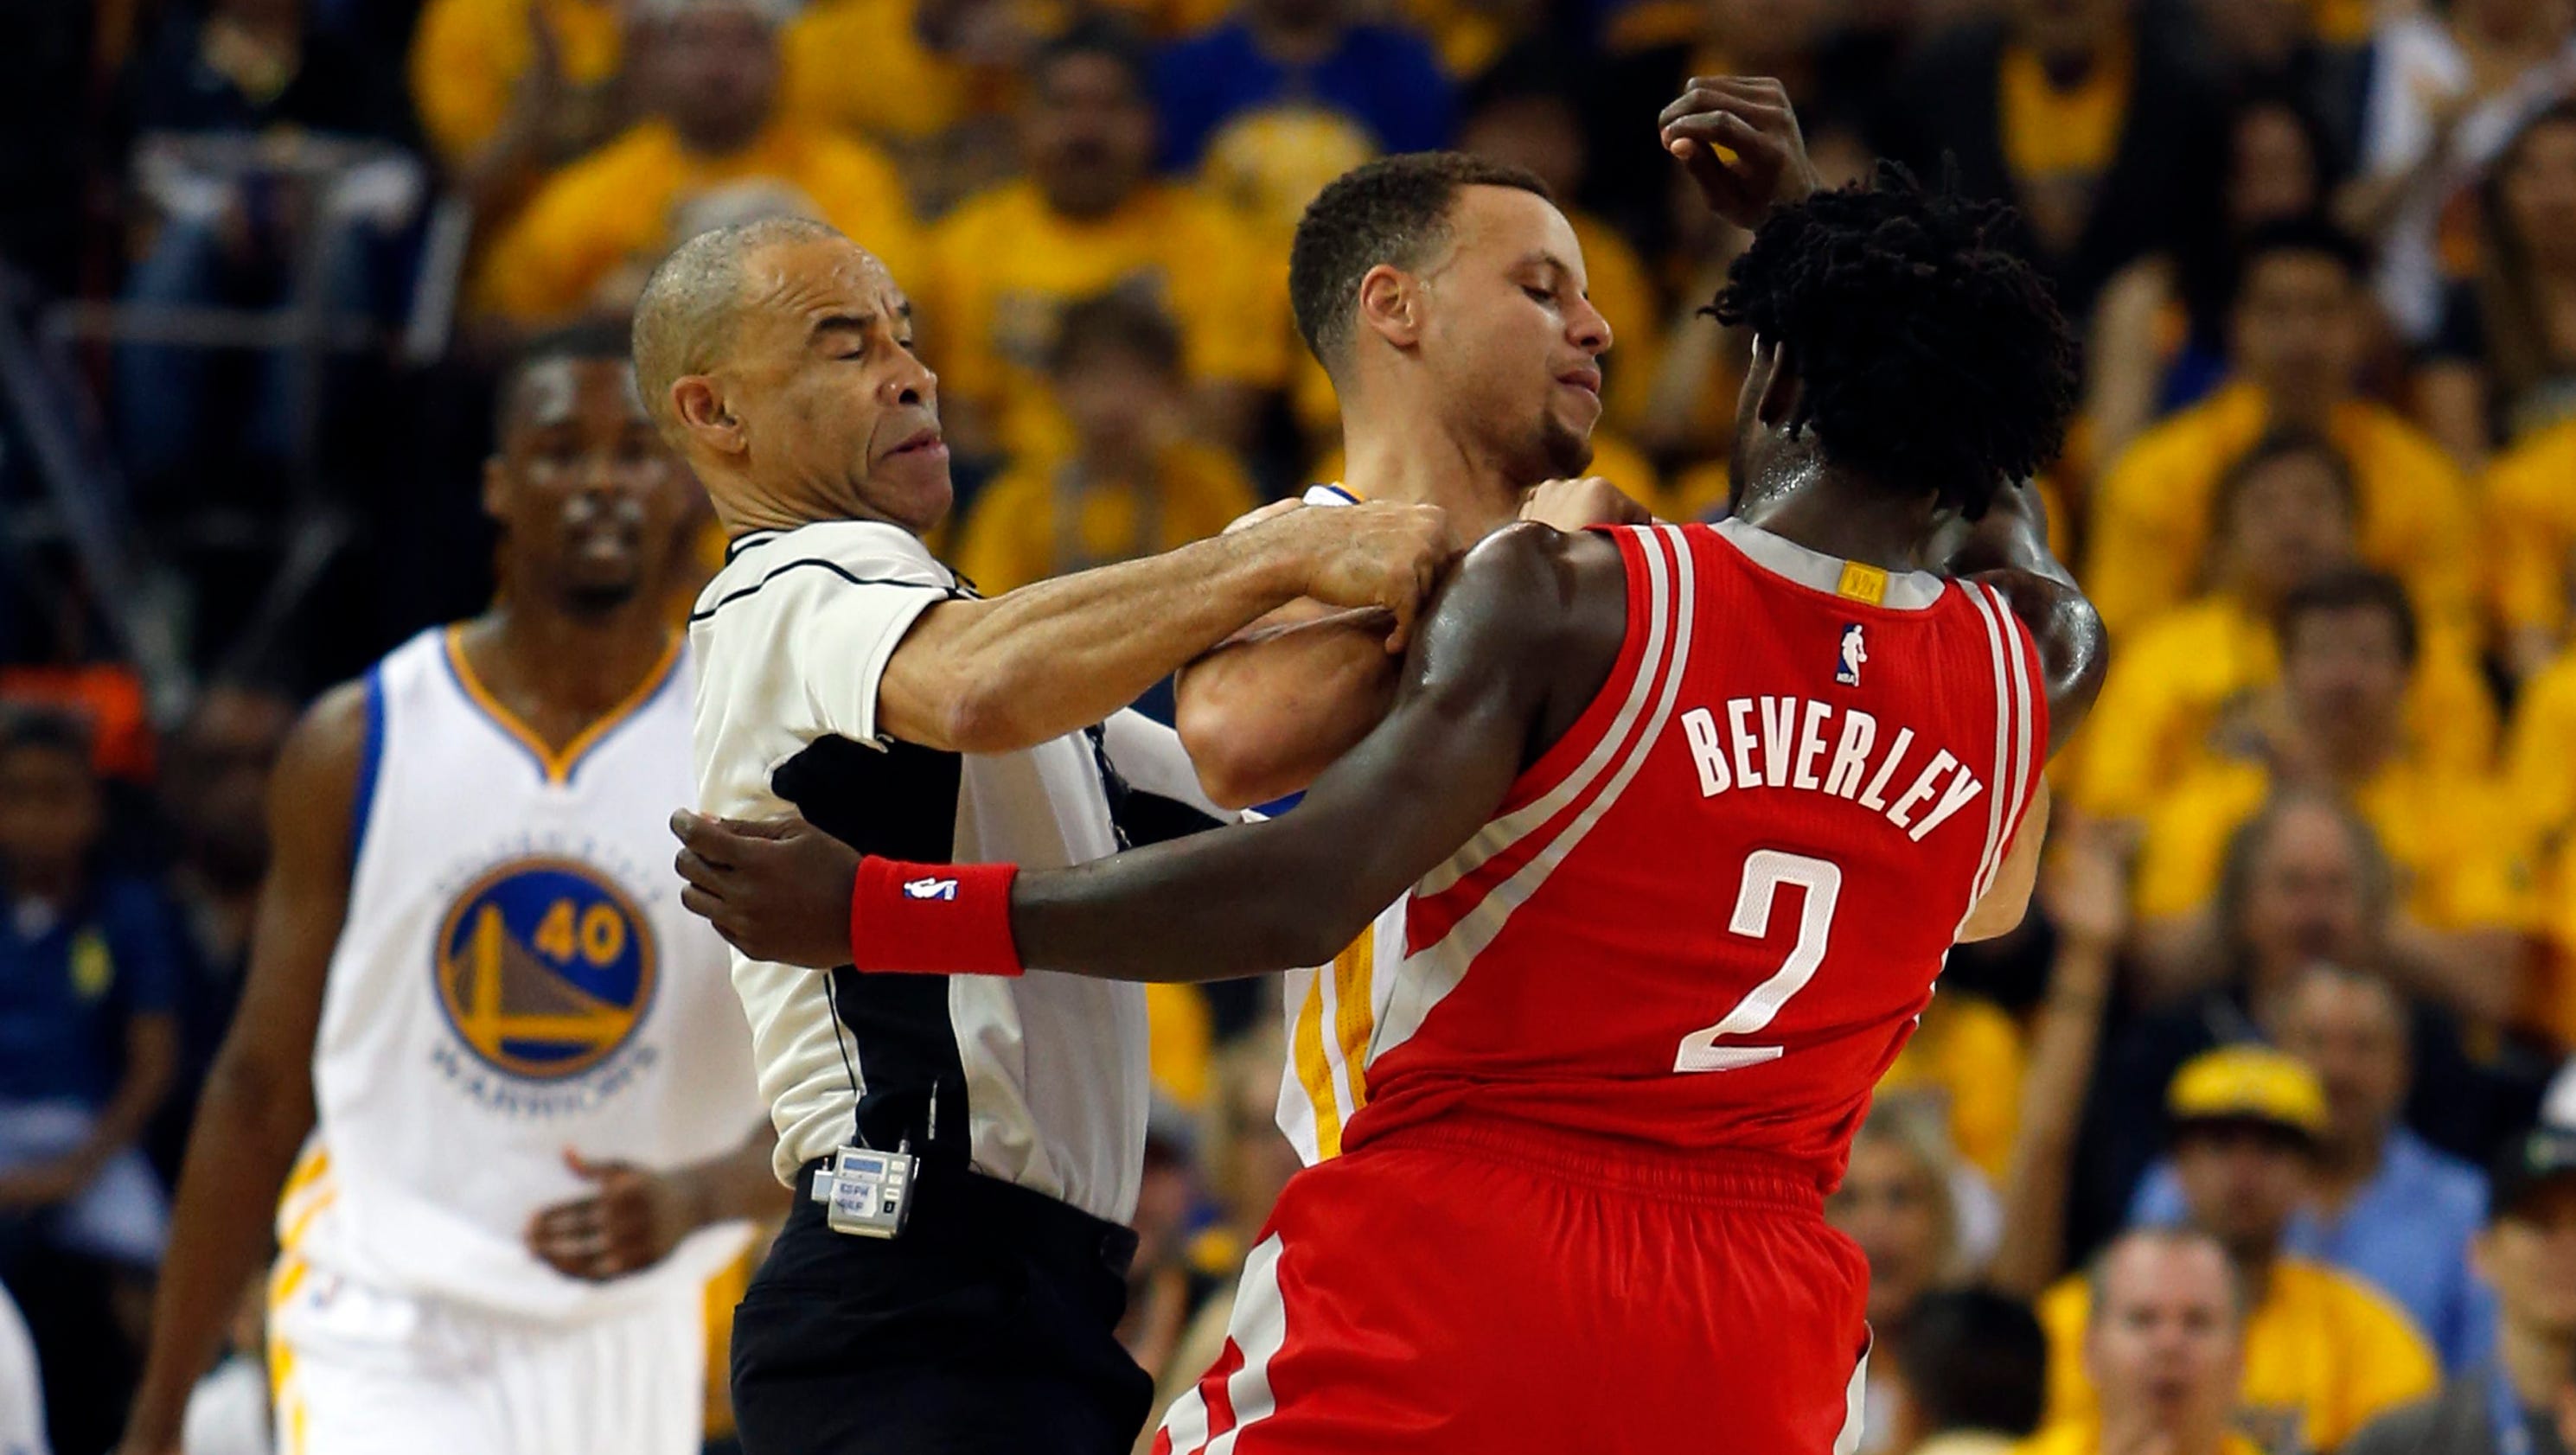 Patrick Beverley's play dirty? Warriors have mixed reactions